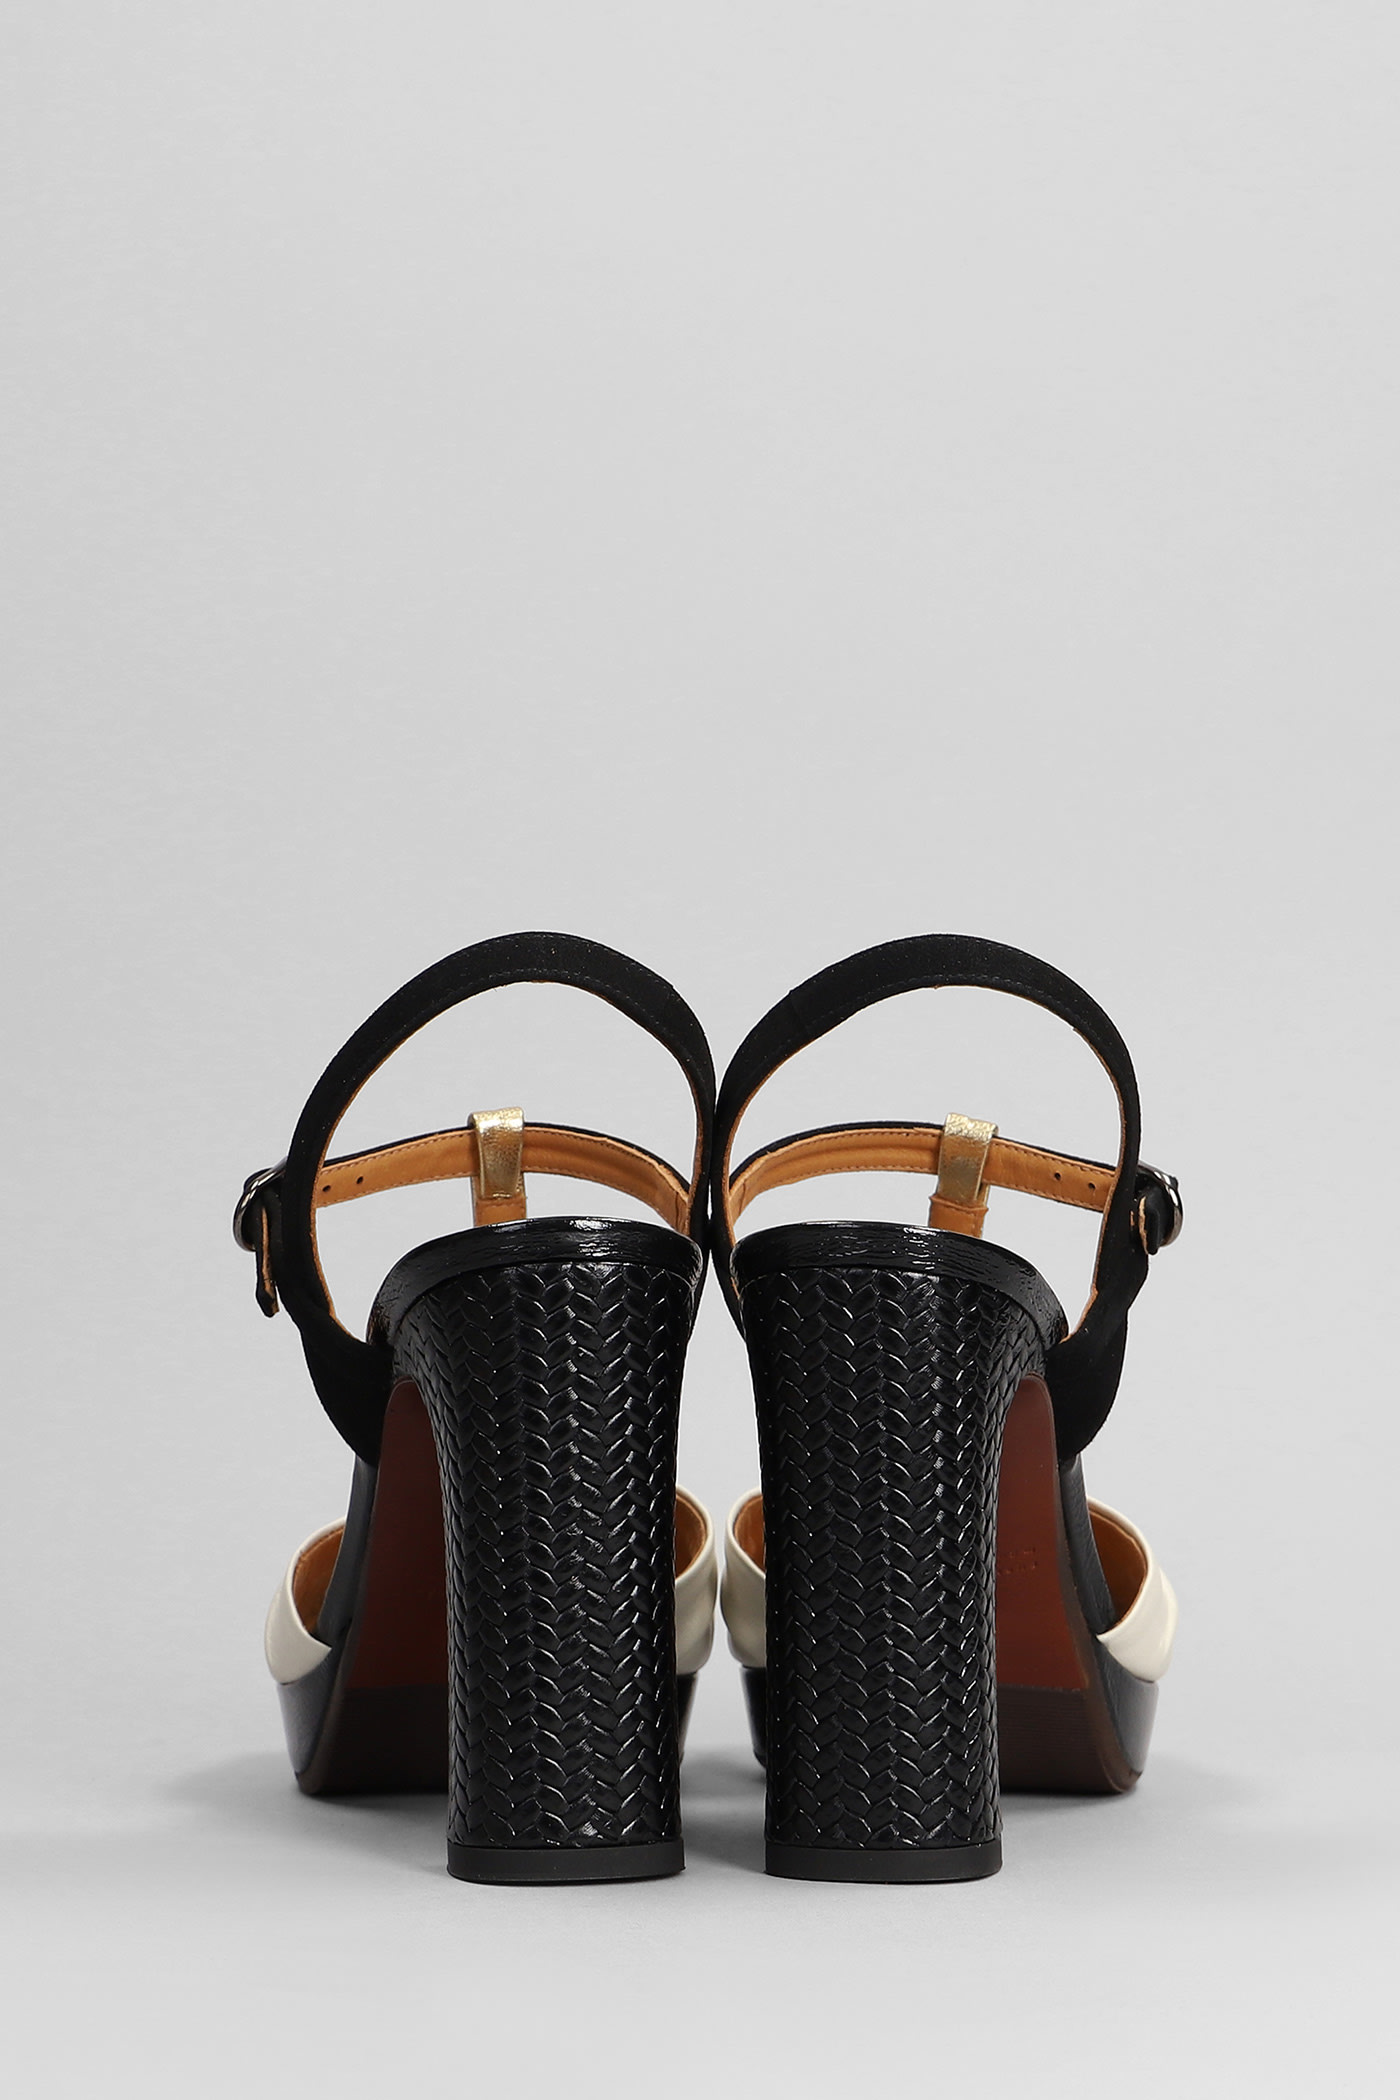 Shop Chie Mihara Cassan Sandals In Beige Leather